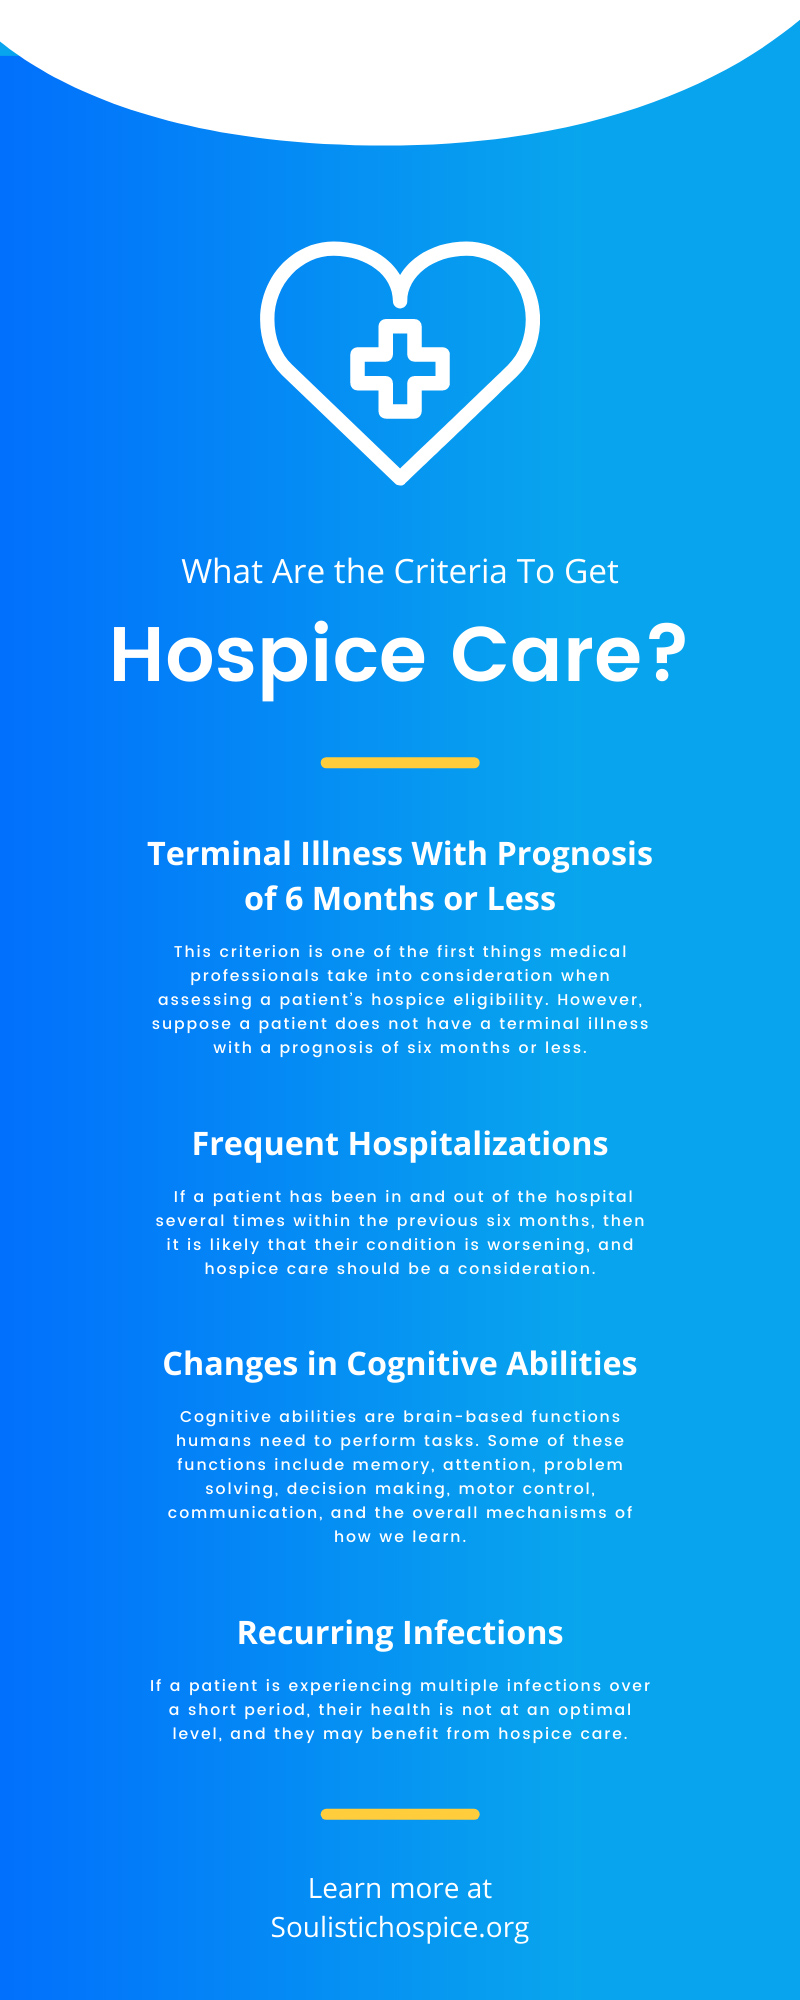 What Are the Criteria To Get Hospice Care?